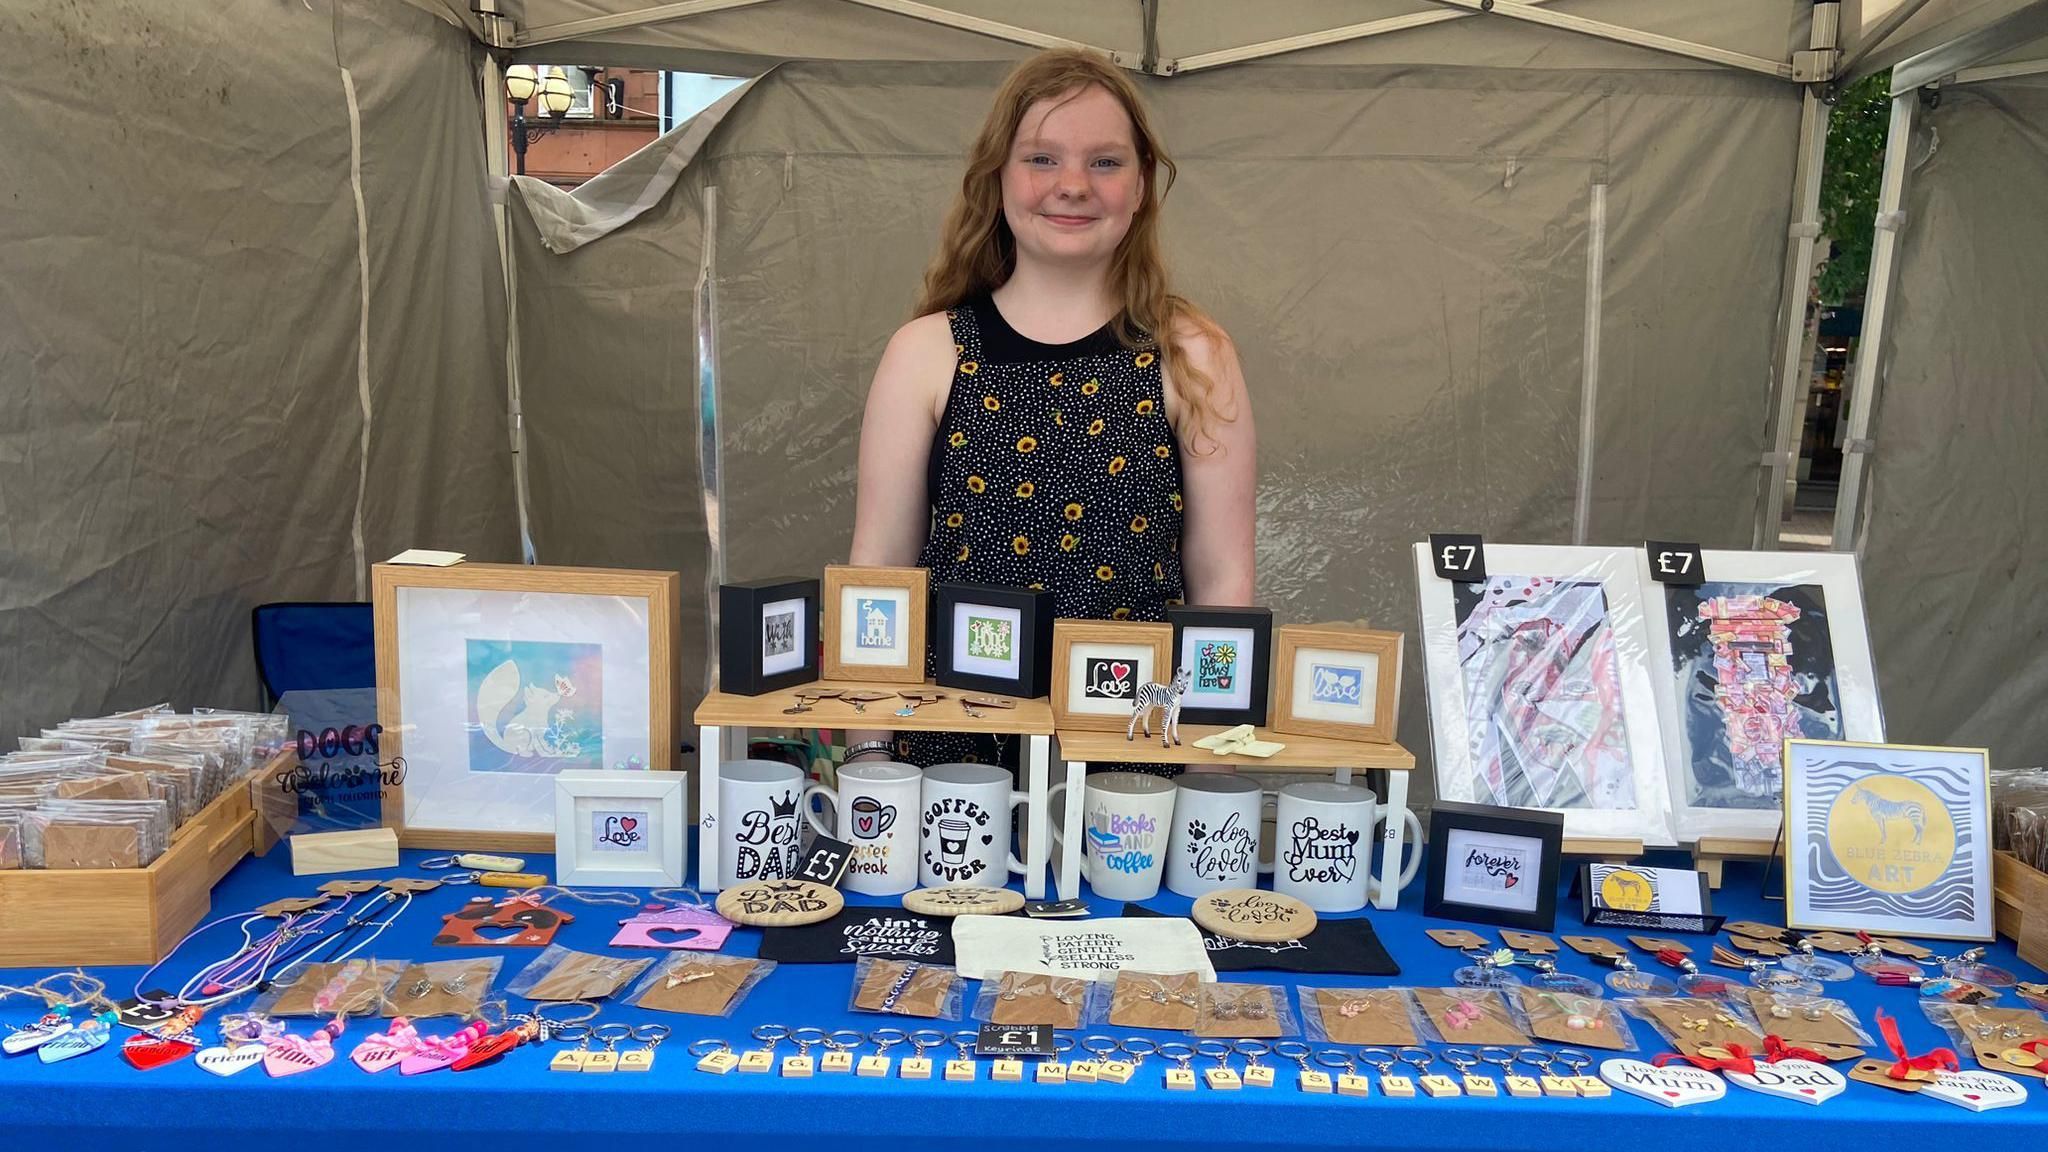 Teenager in flower dress stands behind stall filled with mugs, artwork and jewelry